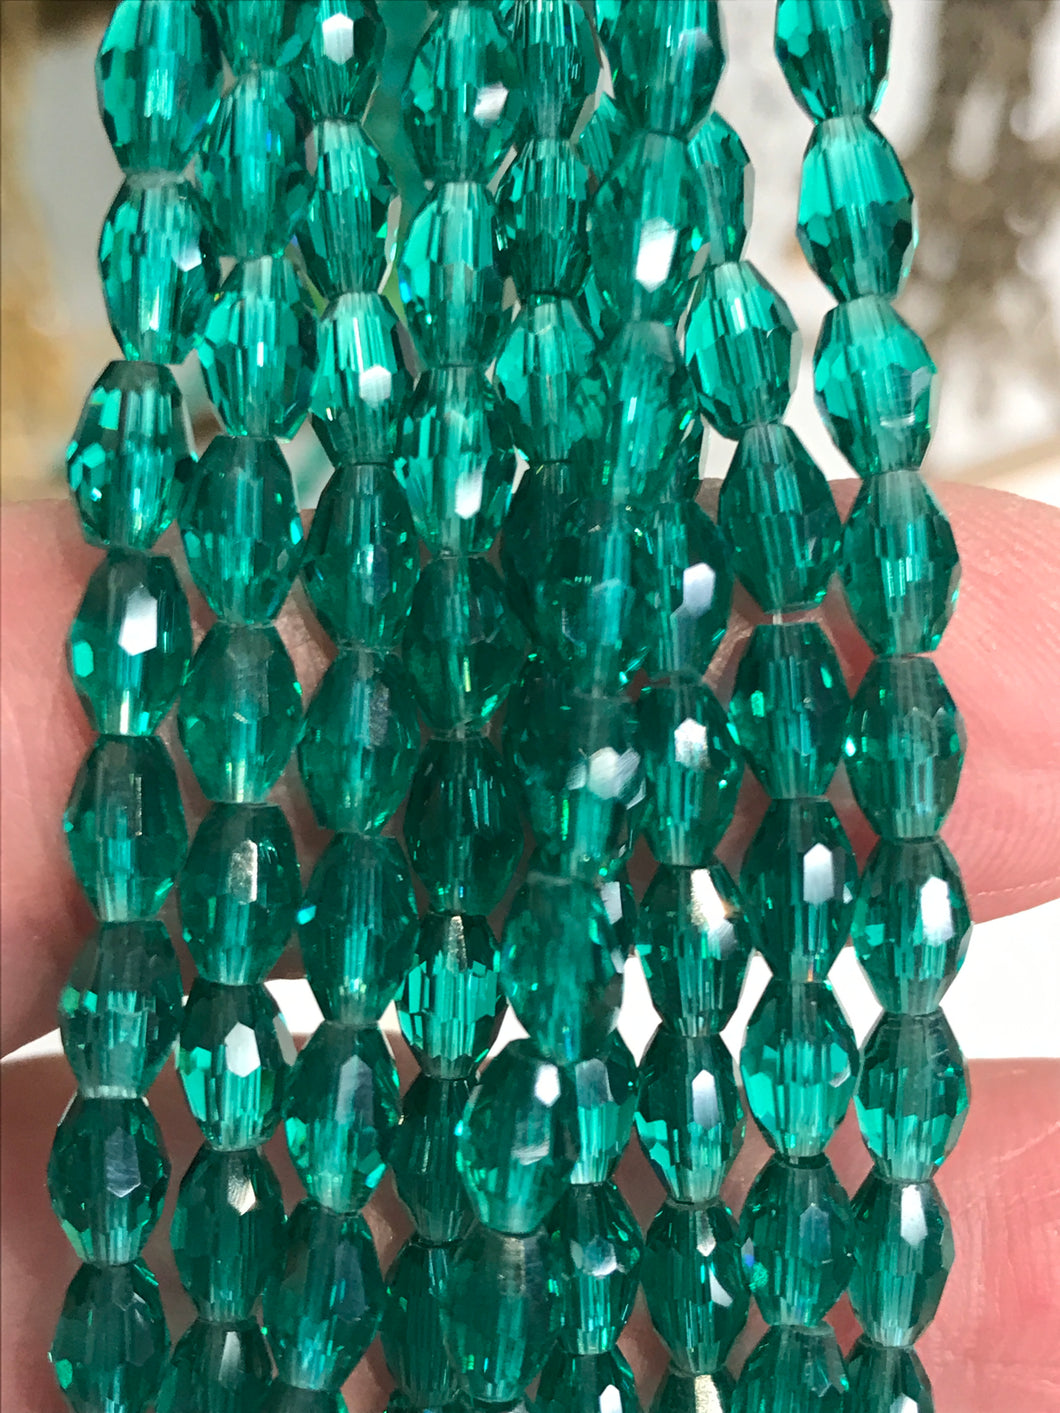 GLASS BEAD FACETED 6X4MM